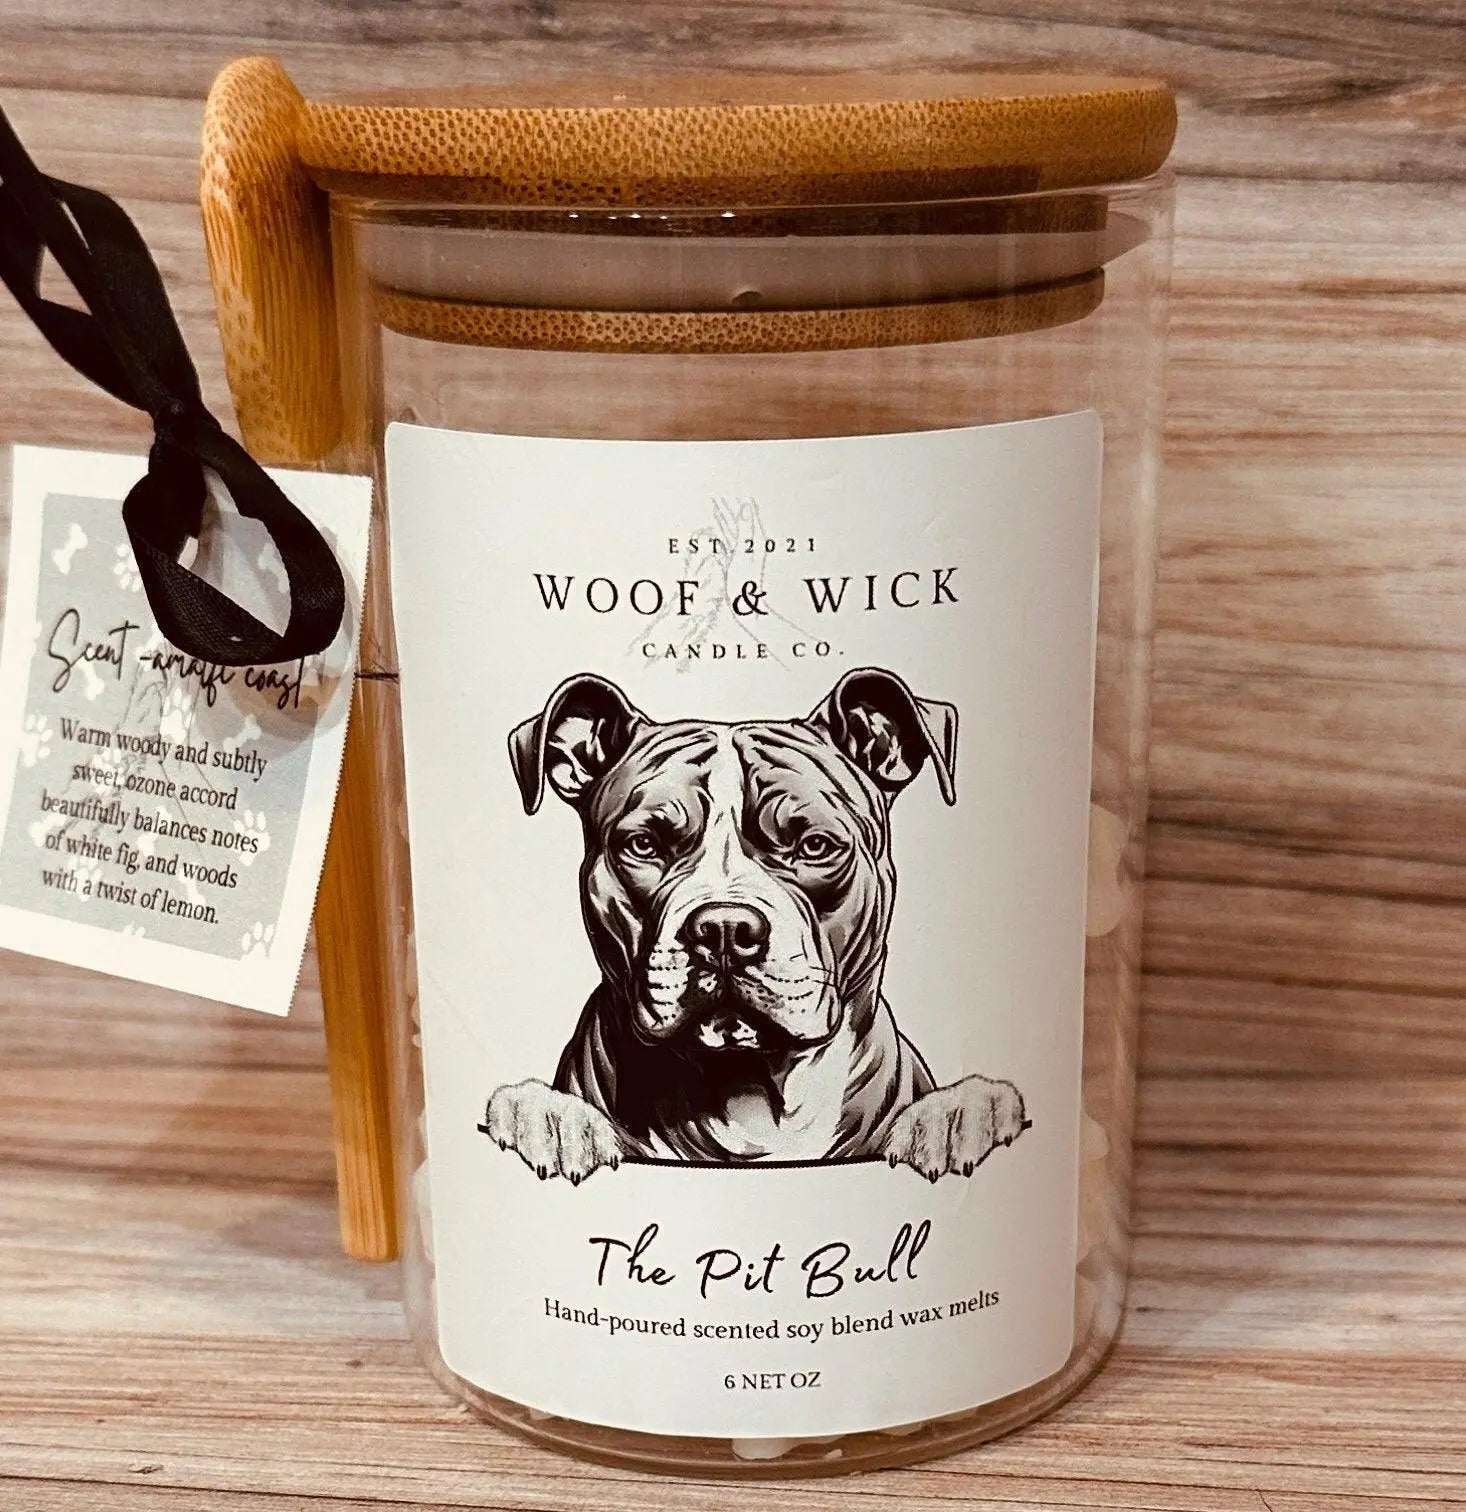 The Pit Bull - Personalized Dog Scoopable Best Scented Wax Melts for Wax Warmers - Woof & Wick Candle Co.